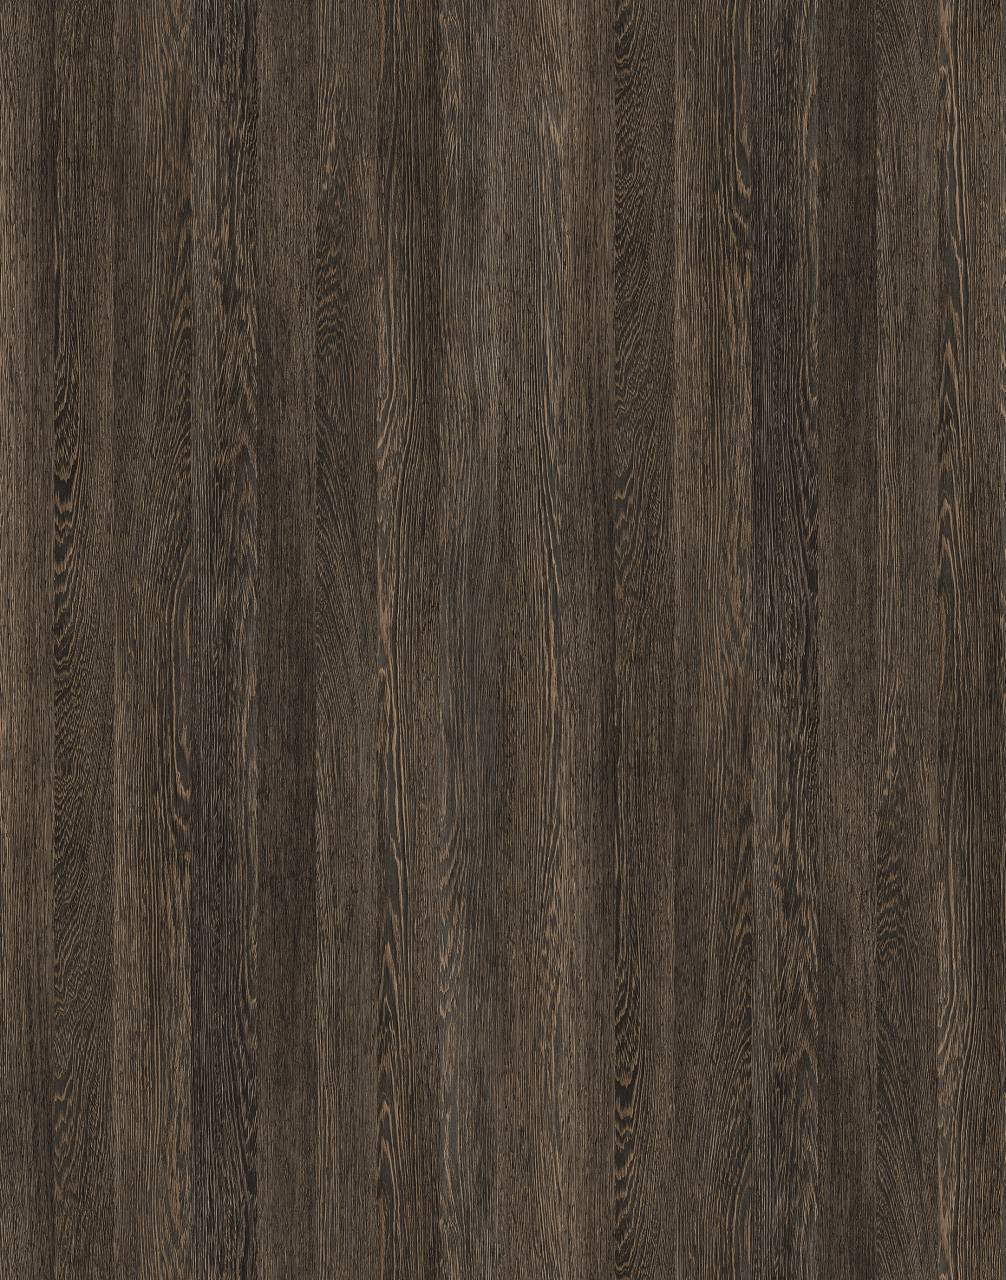 Detailed close-up of 7648 Vintage Wenge SN HPL, showcasing its textured surface and vintage wenge wood grain pattern.